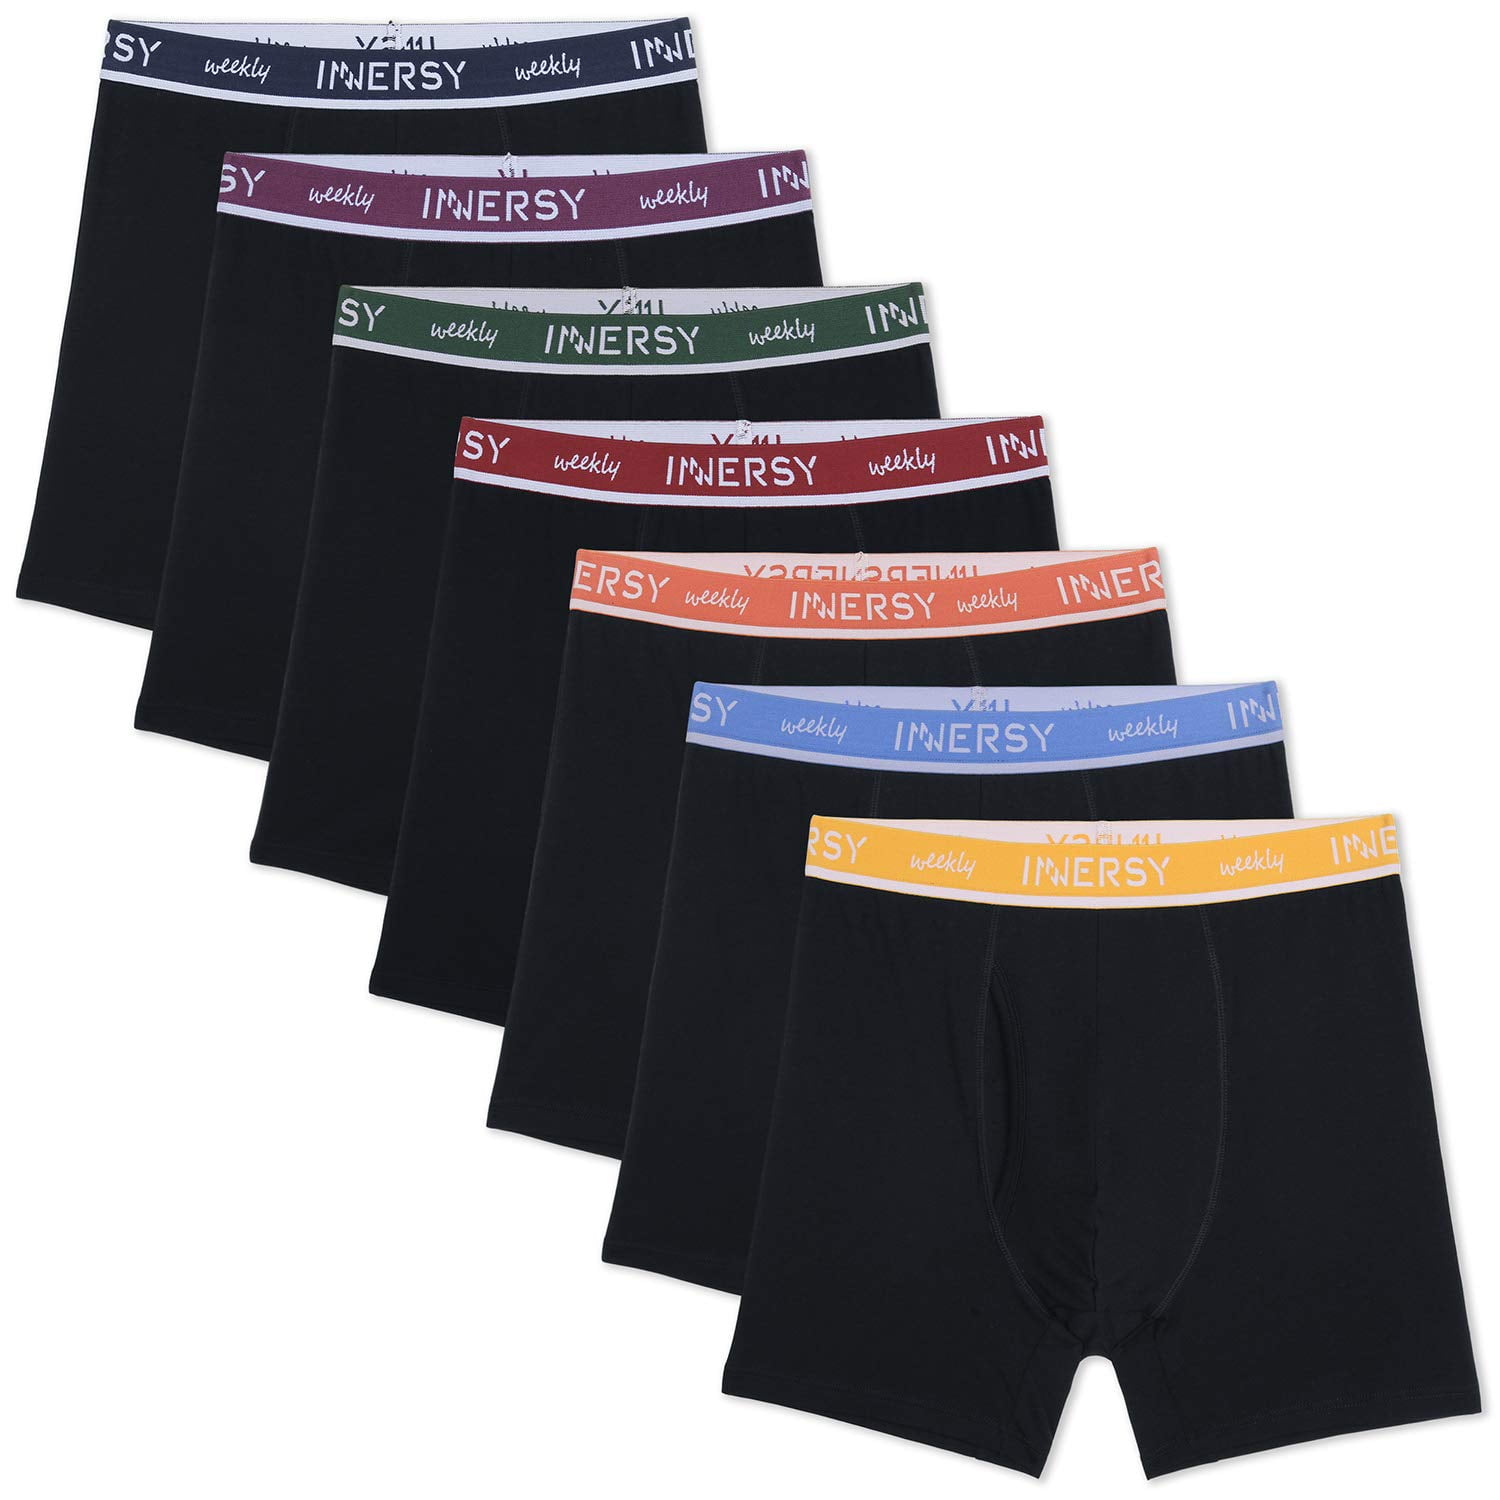 INNERSY Mens Boxer Briefs with Fly Cotton Stretchy Underwear 7 Pack ...